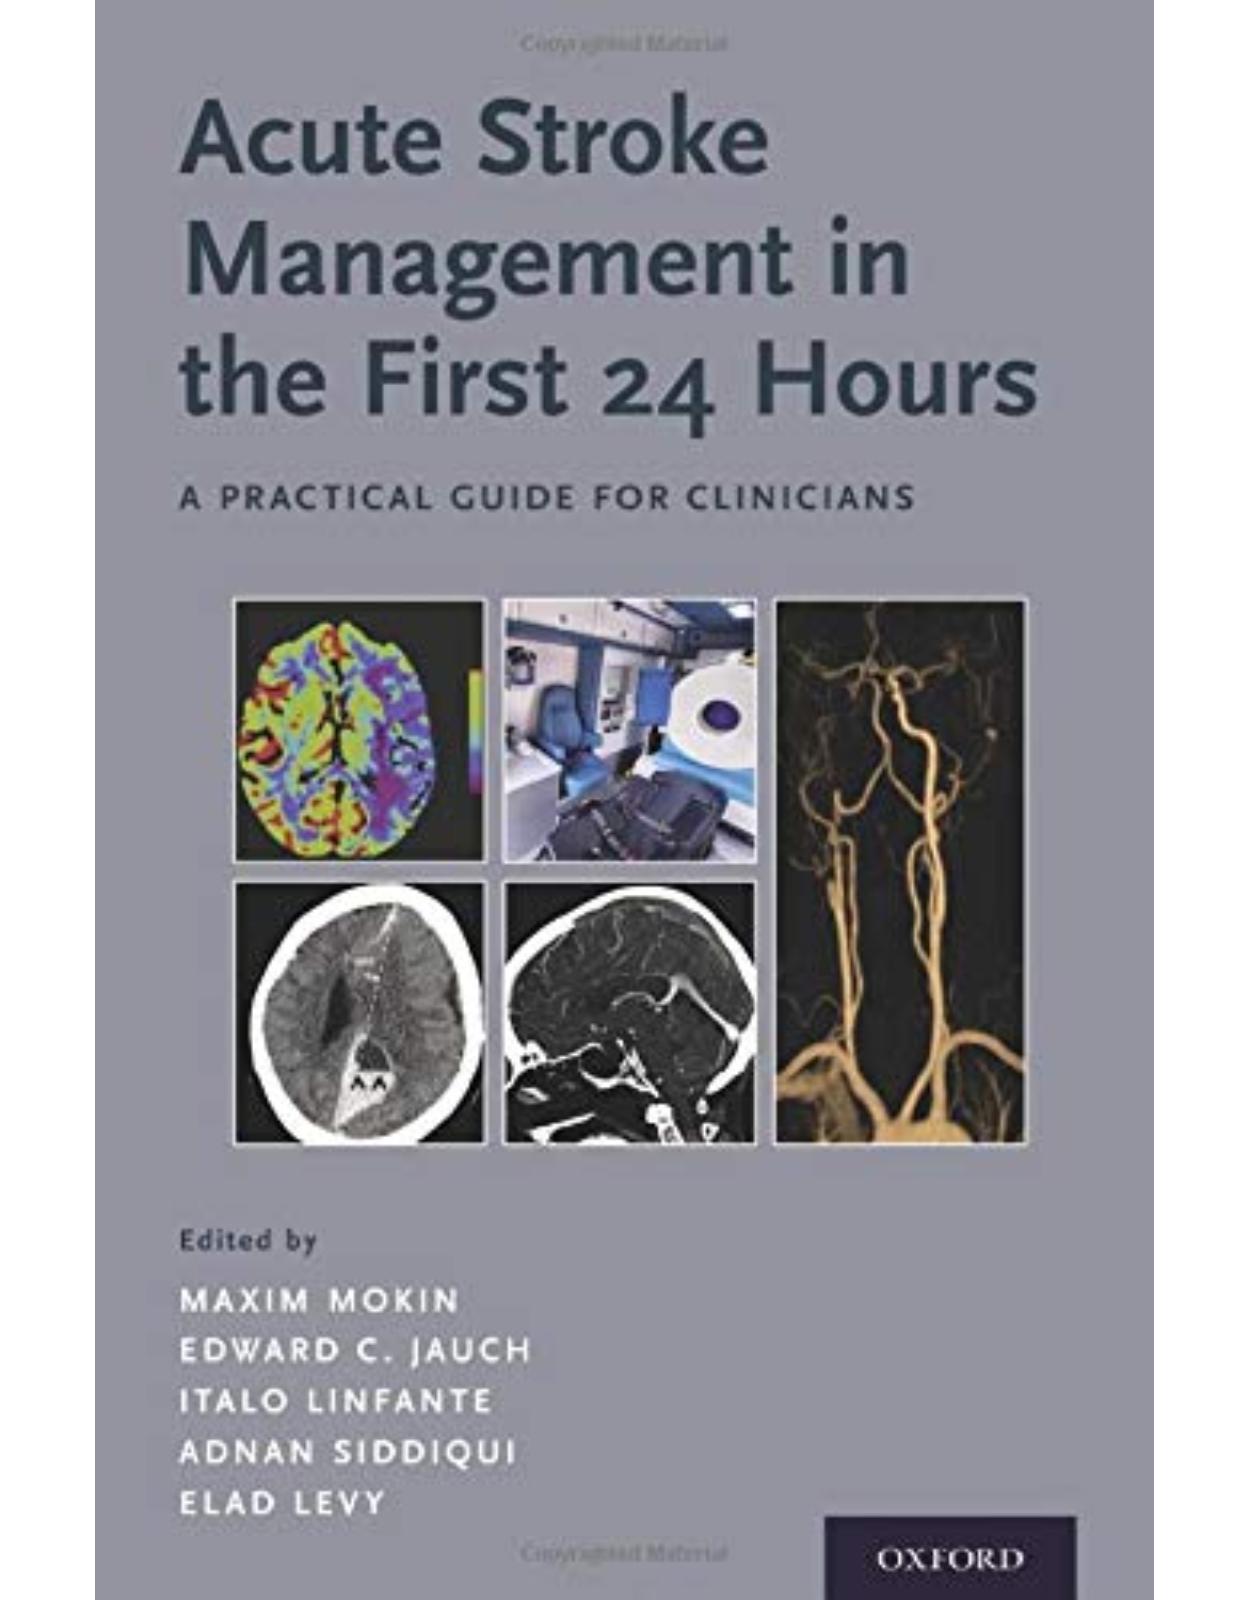 Acute Stroke Management in the First 24 Hours: A Practical Guide for Clinicians 